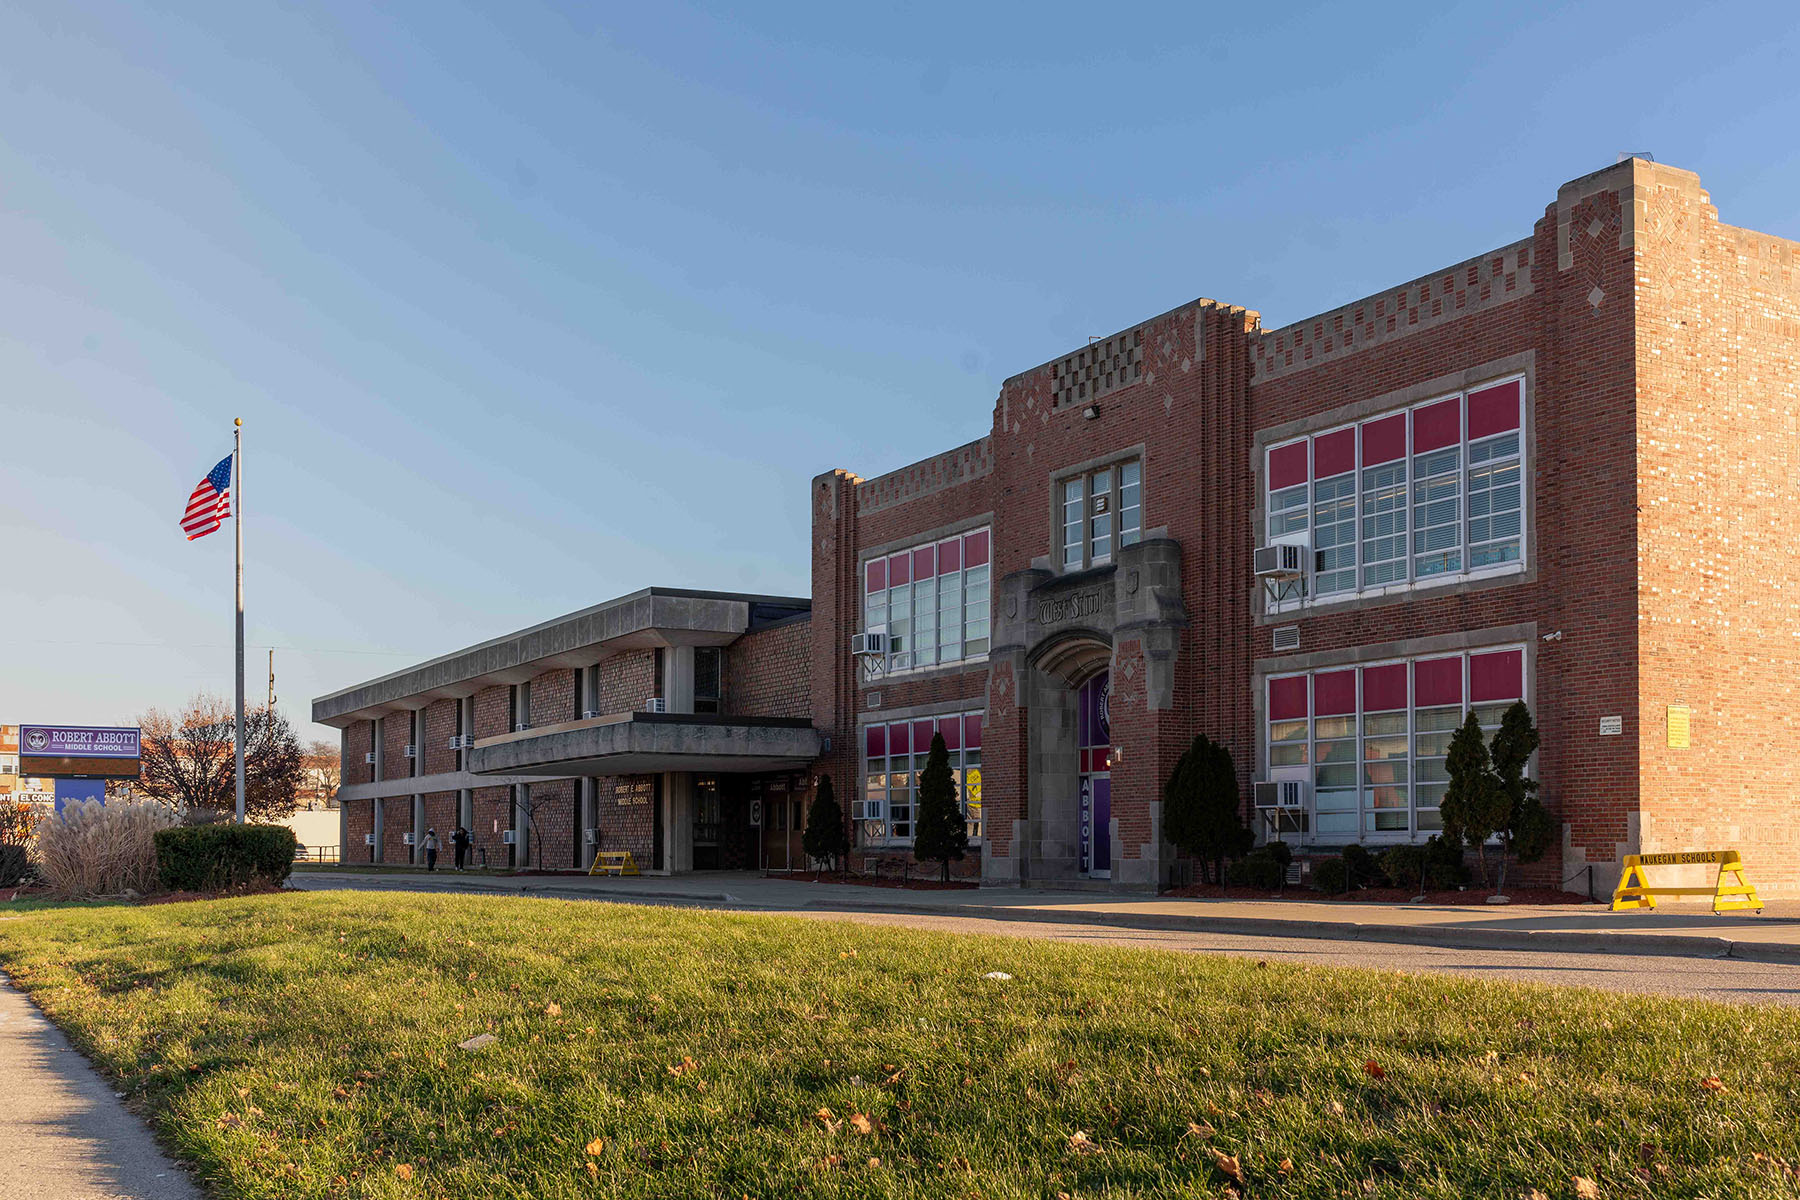 A view of the Robert Abbott Middle School building